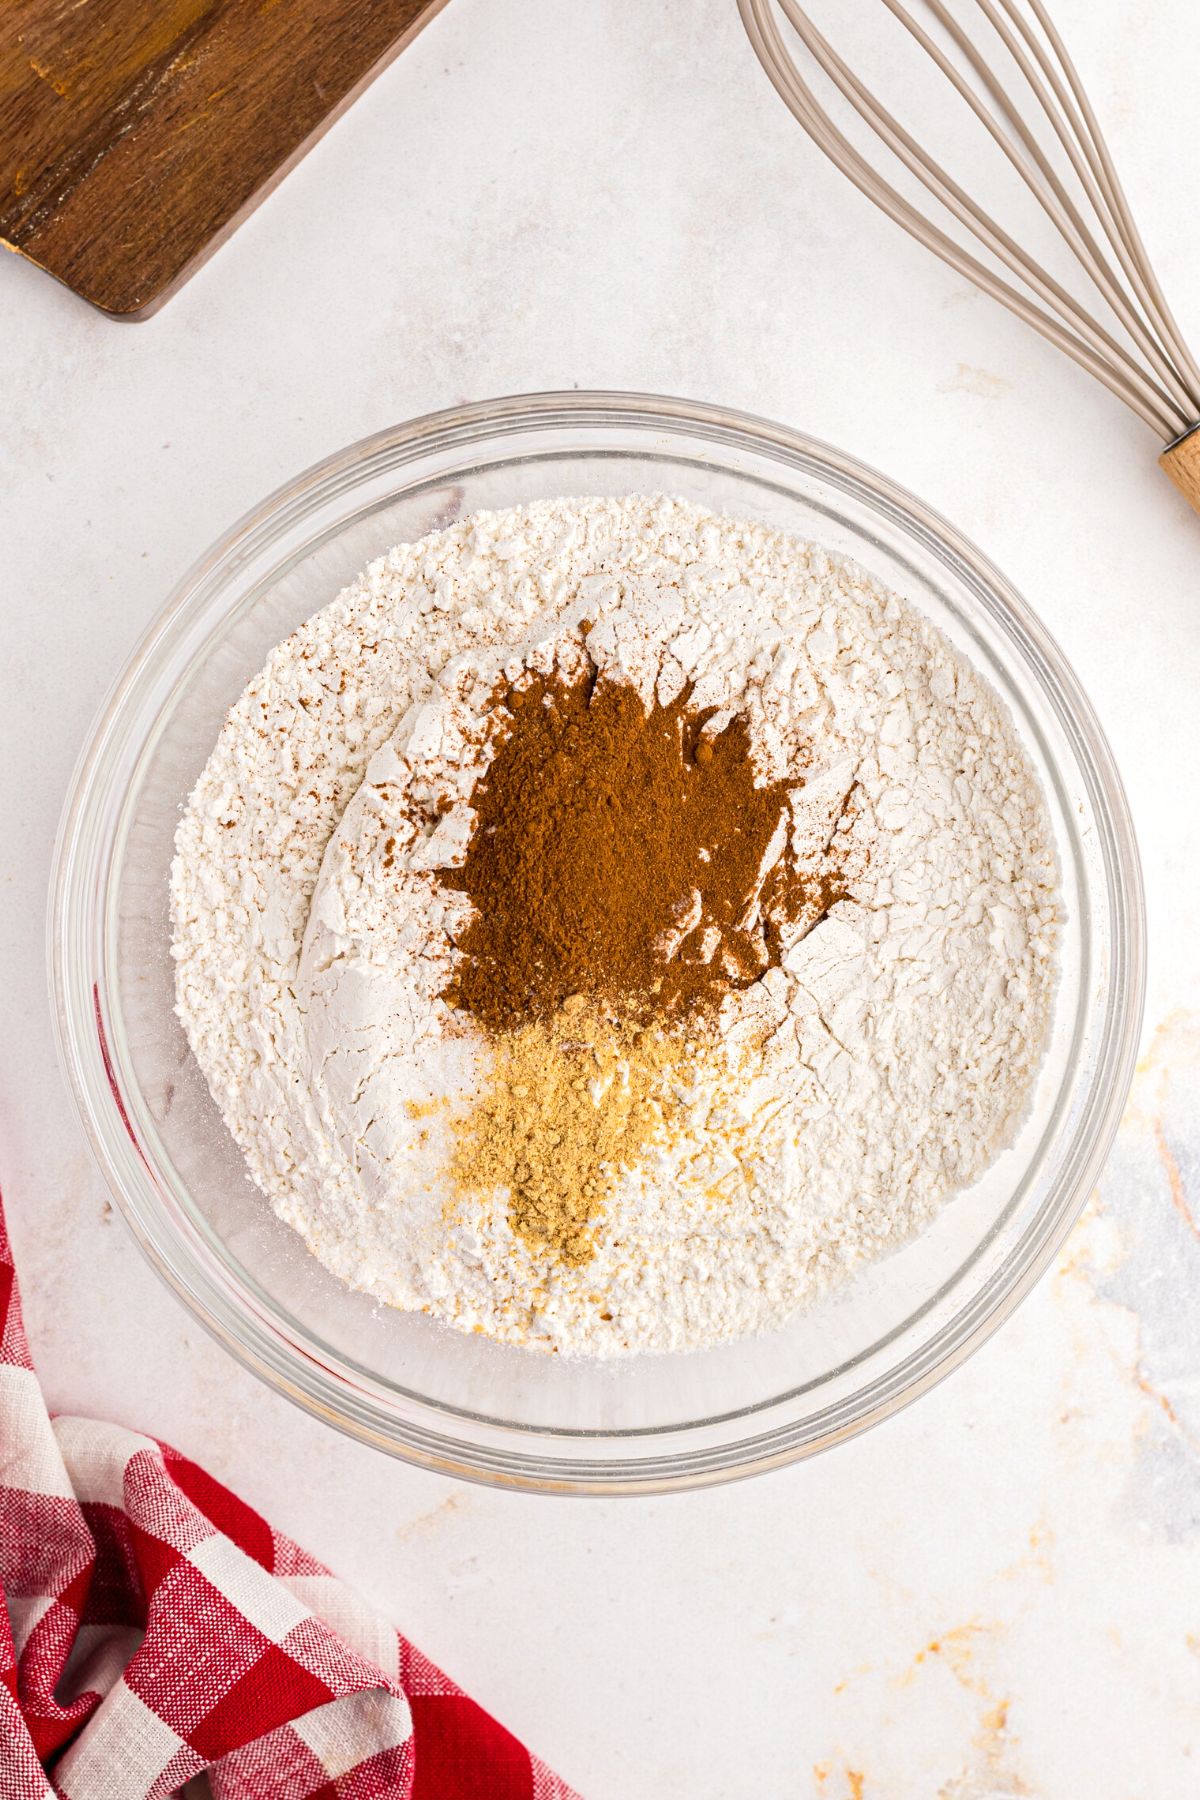 flour, cinnamon, and other seasonings being mixed in a clear bowl